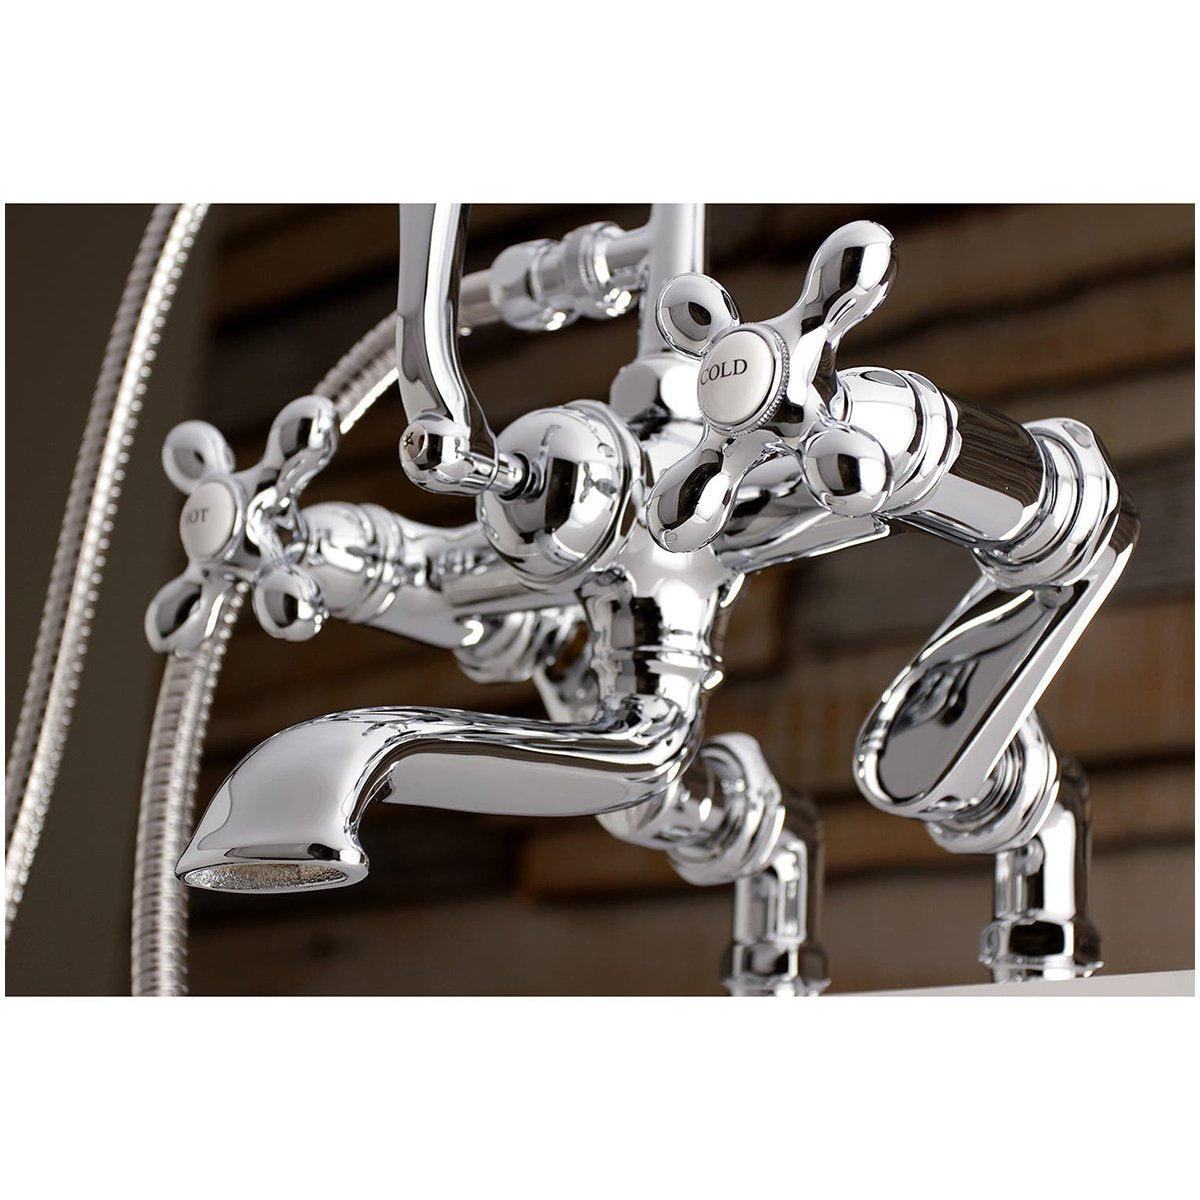 Kingston Brass Aqua Vintage 7-Inch Adjustable Clawfoot Tub Faucet with Hand Shower in Polished Chrome